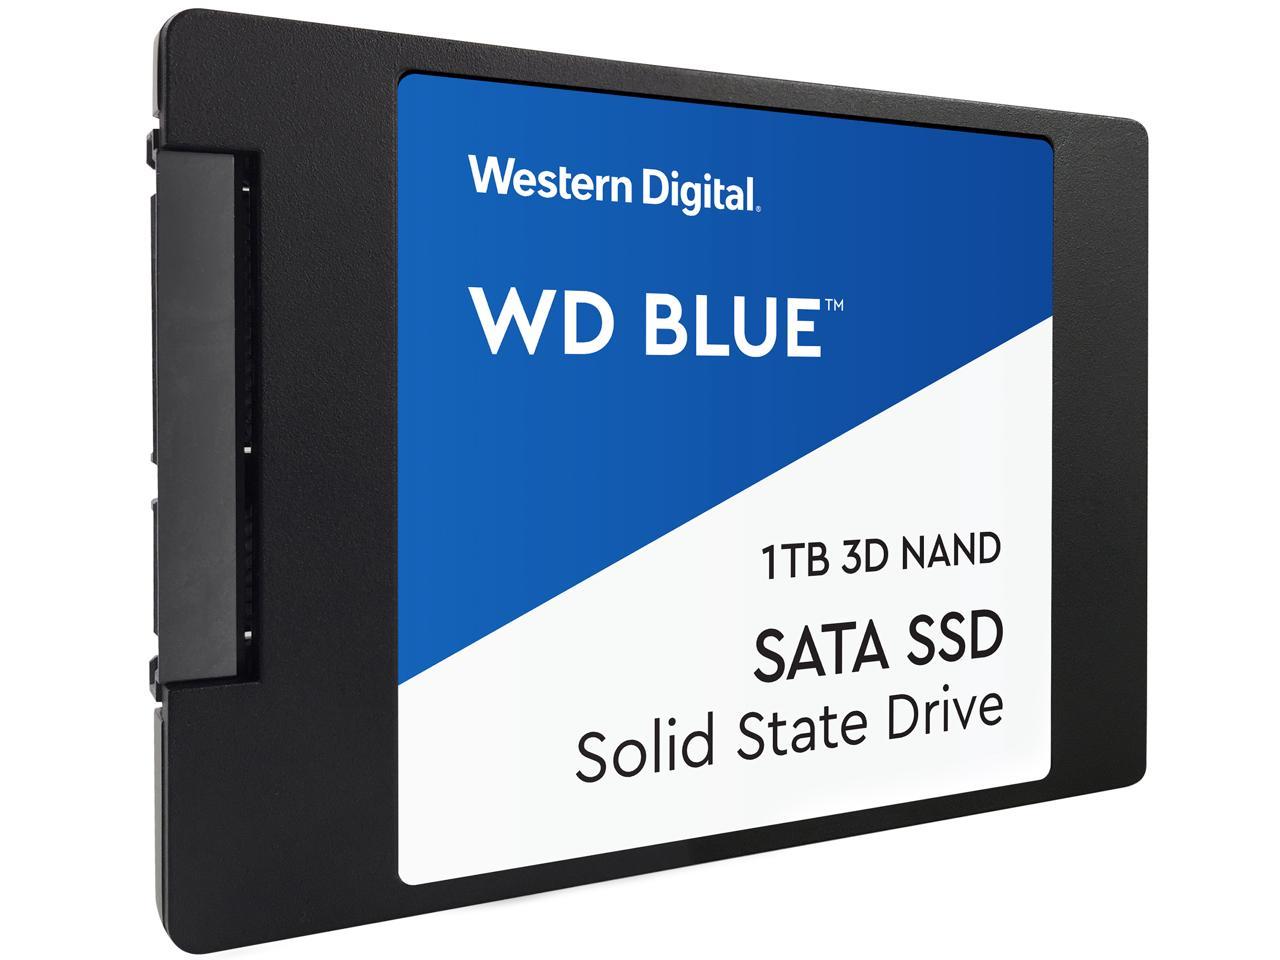 In need of Pollinate Agree with WD Blue 3D NAND 1TB Internal SSD - SATA Solid State Drive - Newegg.com